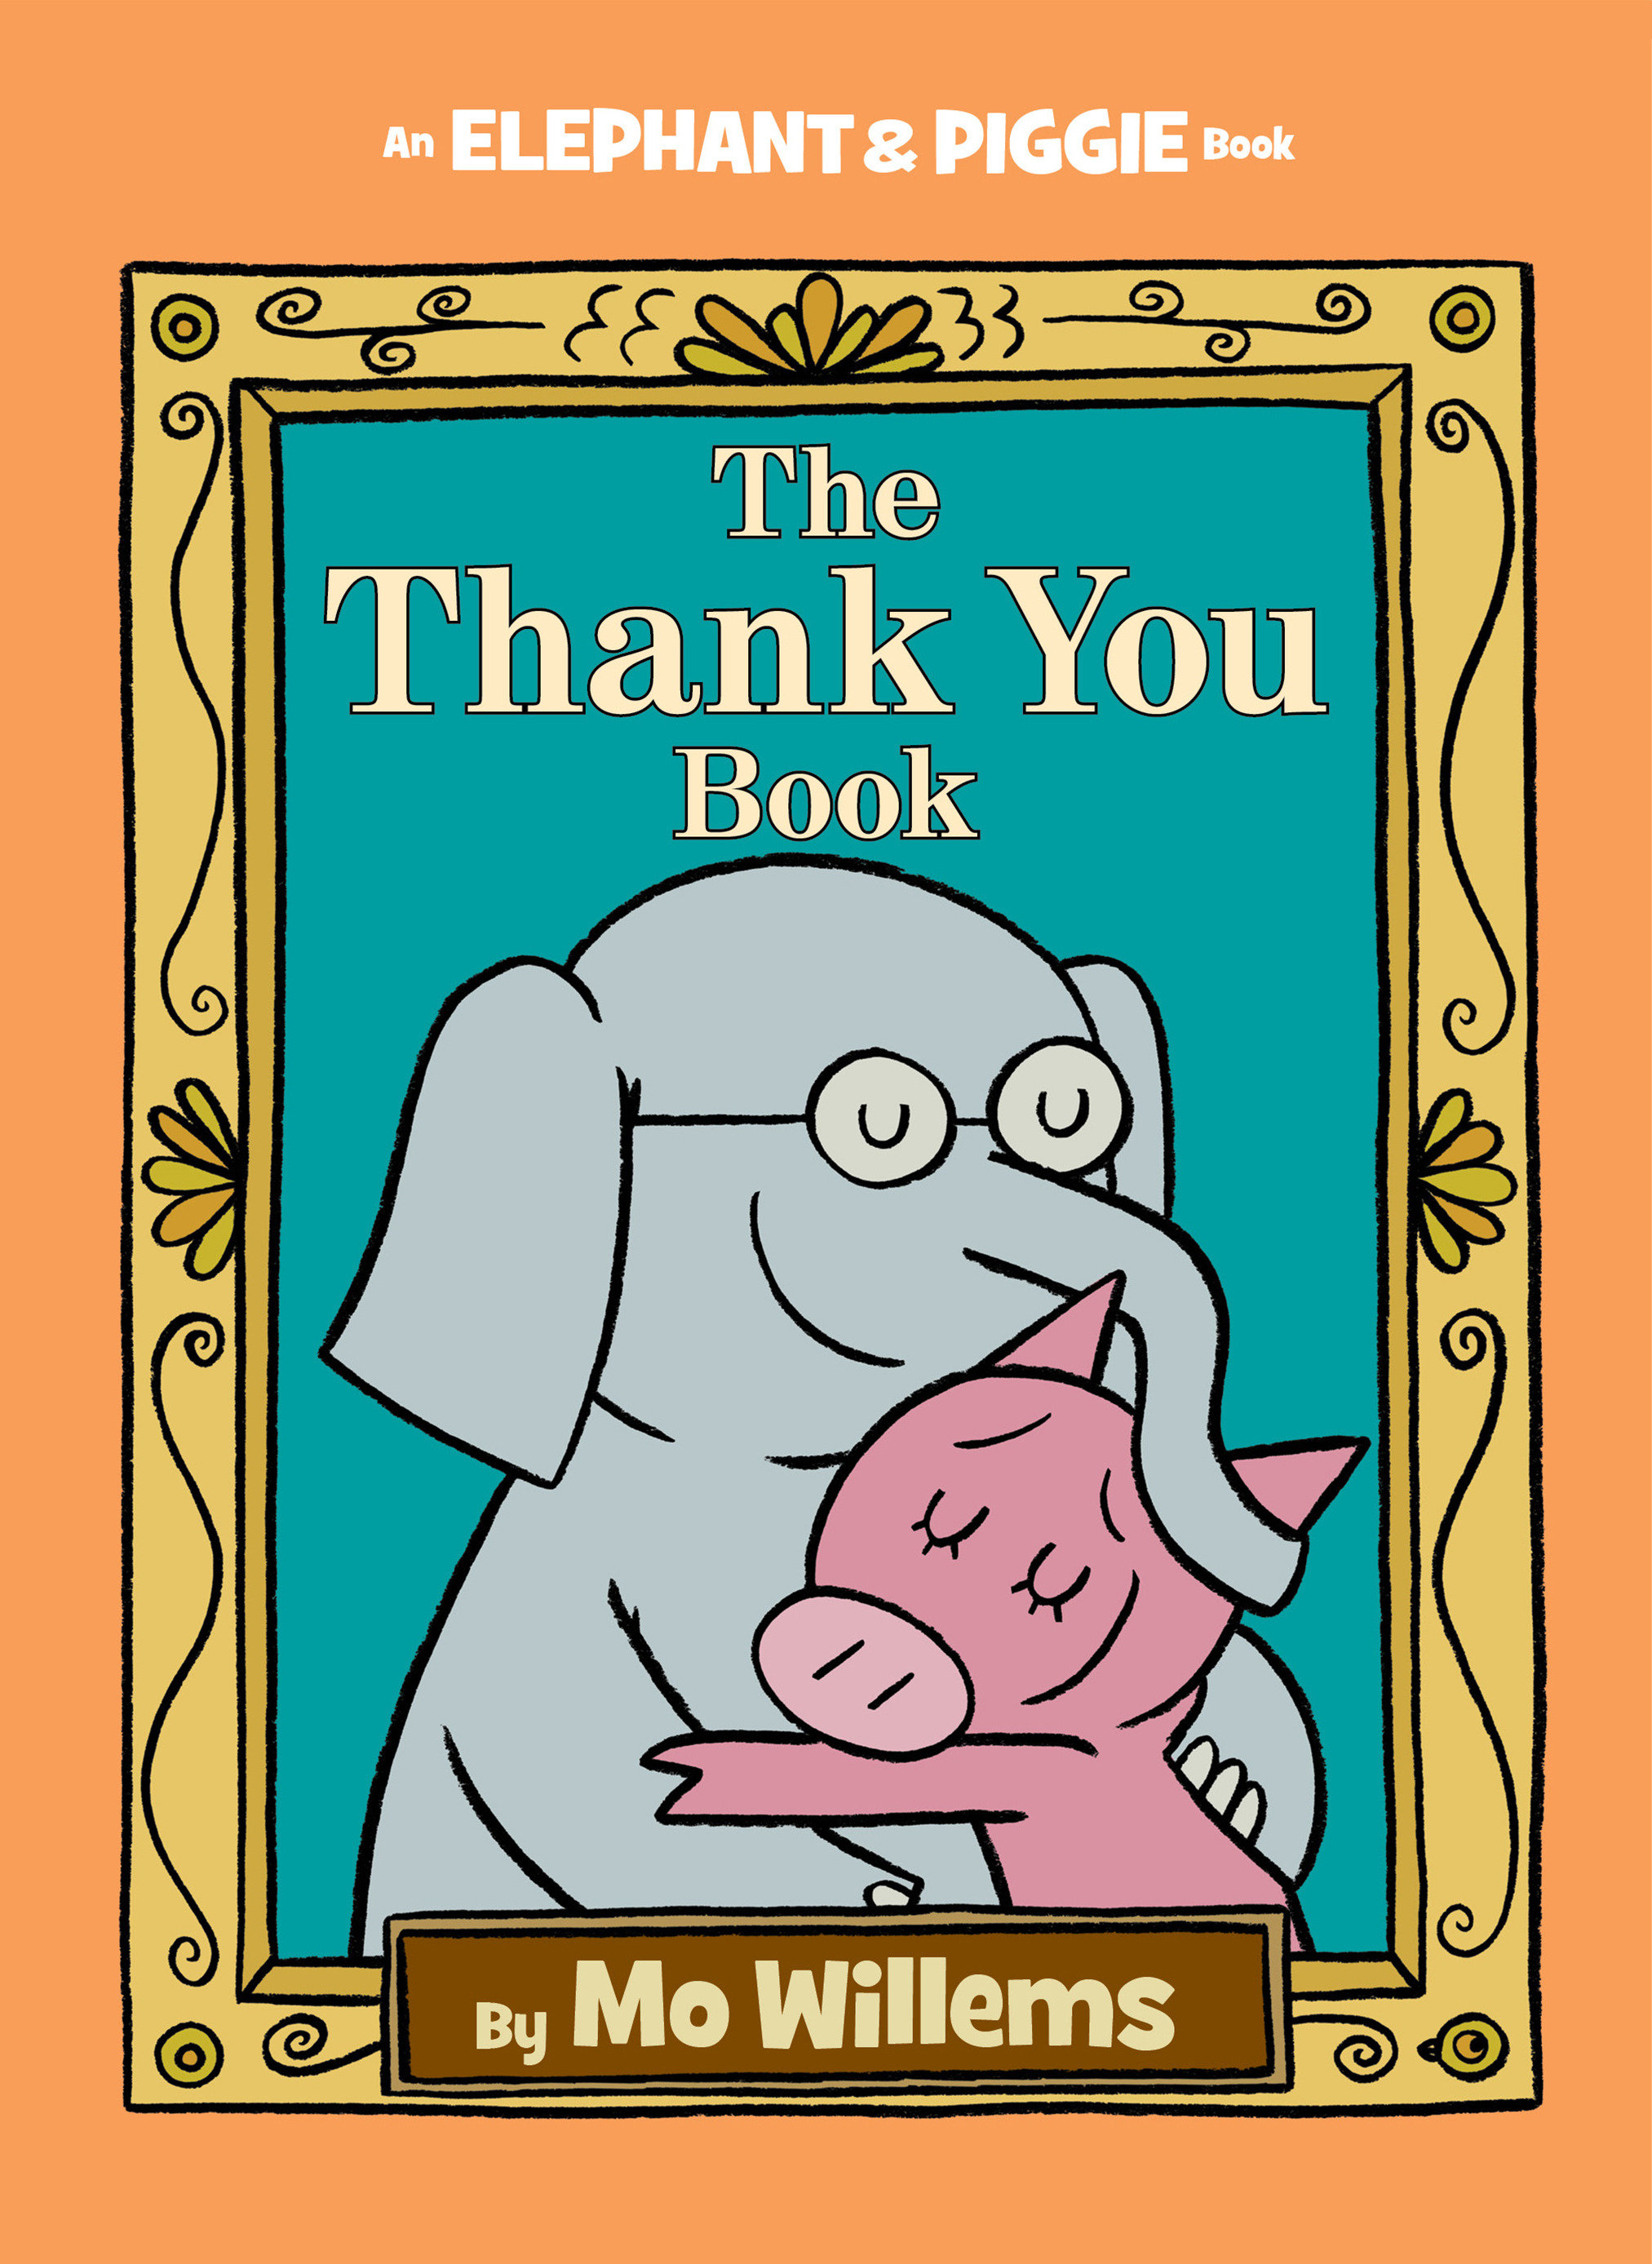 Thank You Book, The-An Elephant And Piggie Book (Hardcover Book)